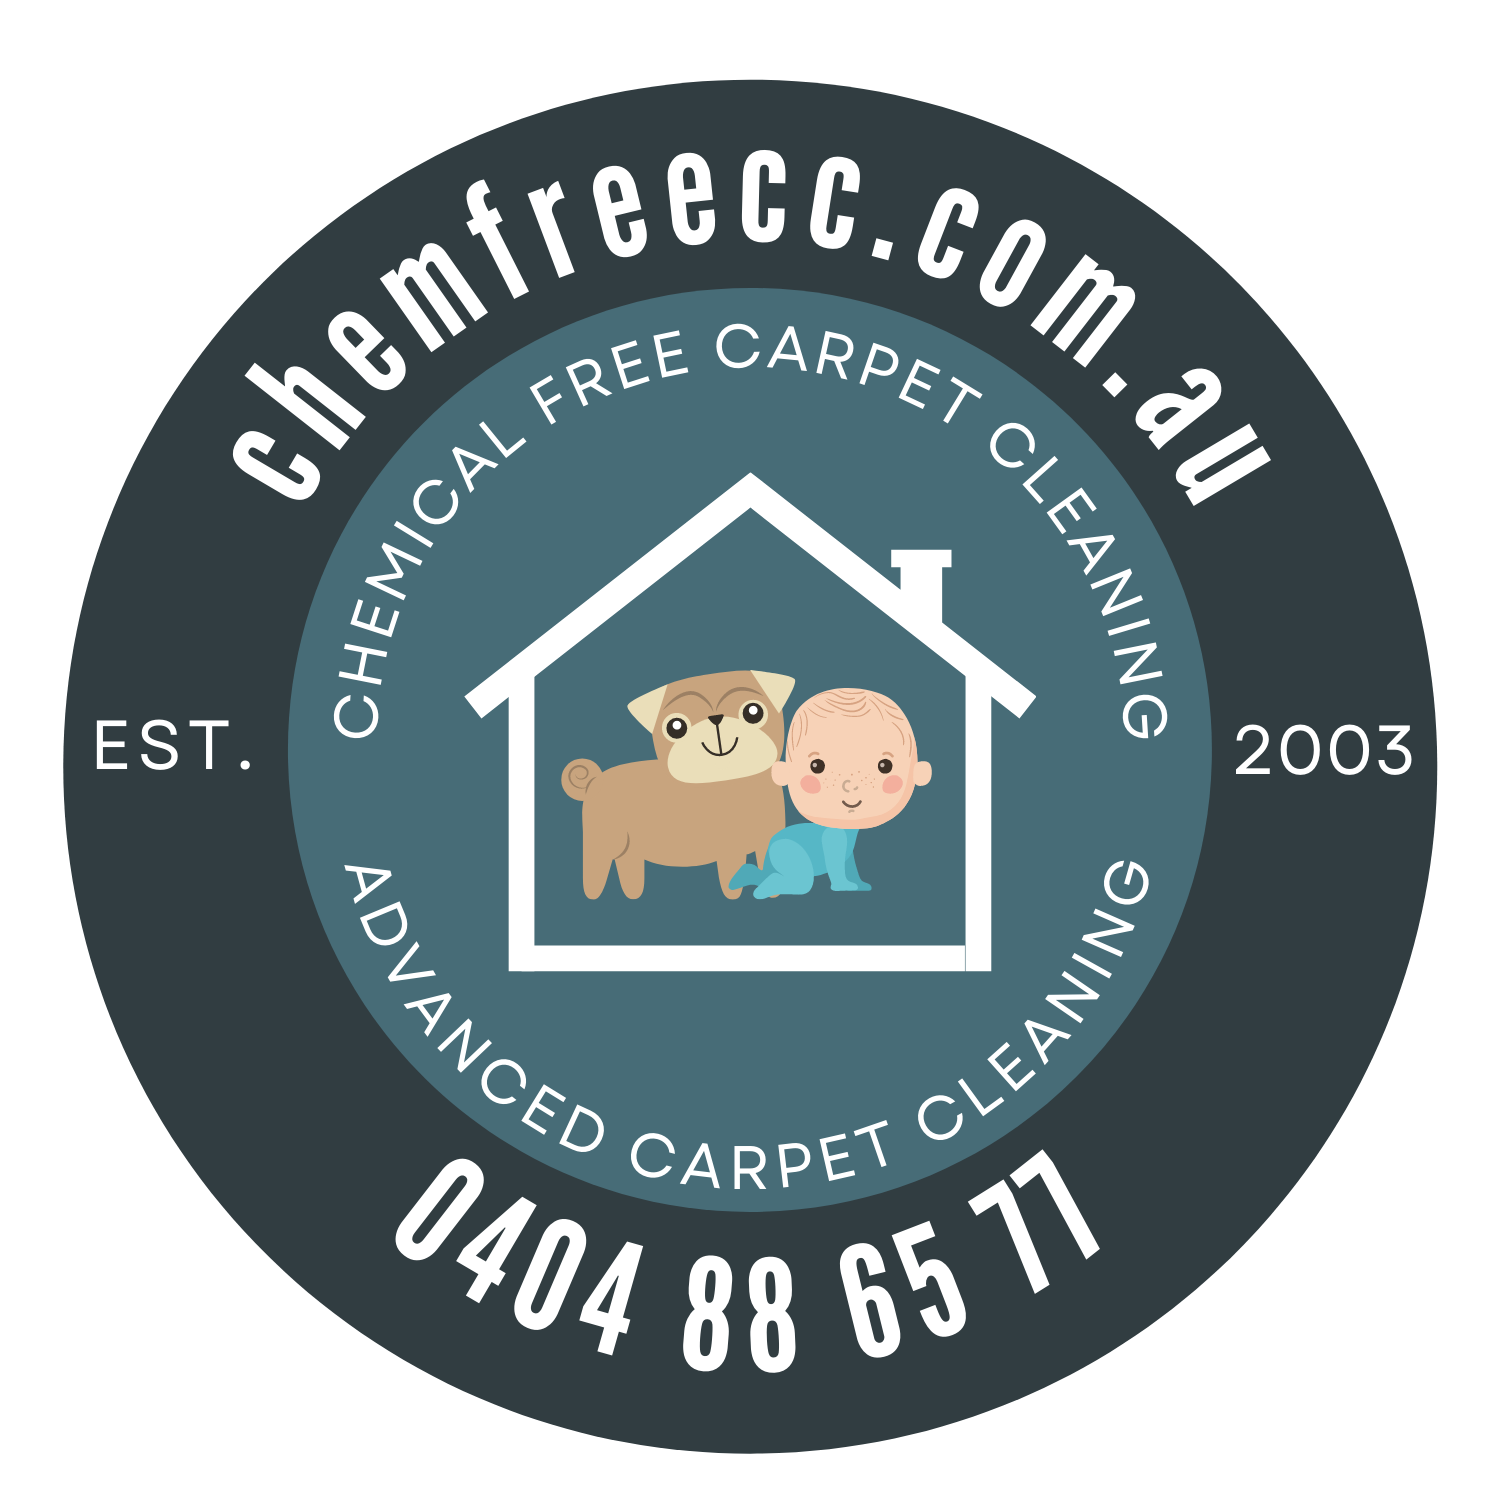 Chemical Free Carpet Cleaning 0404 88 65 77